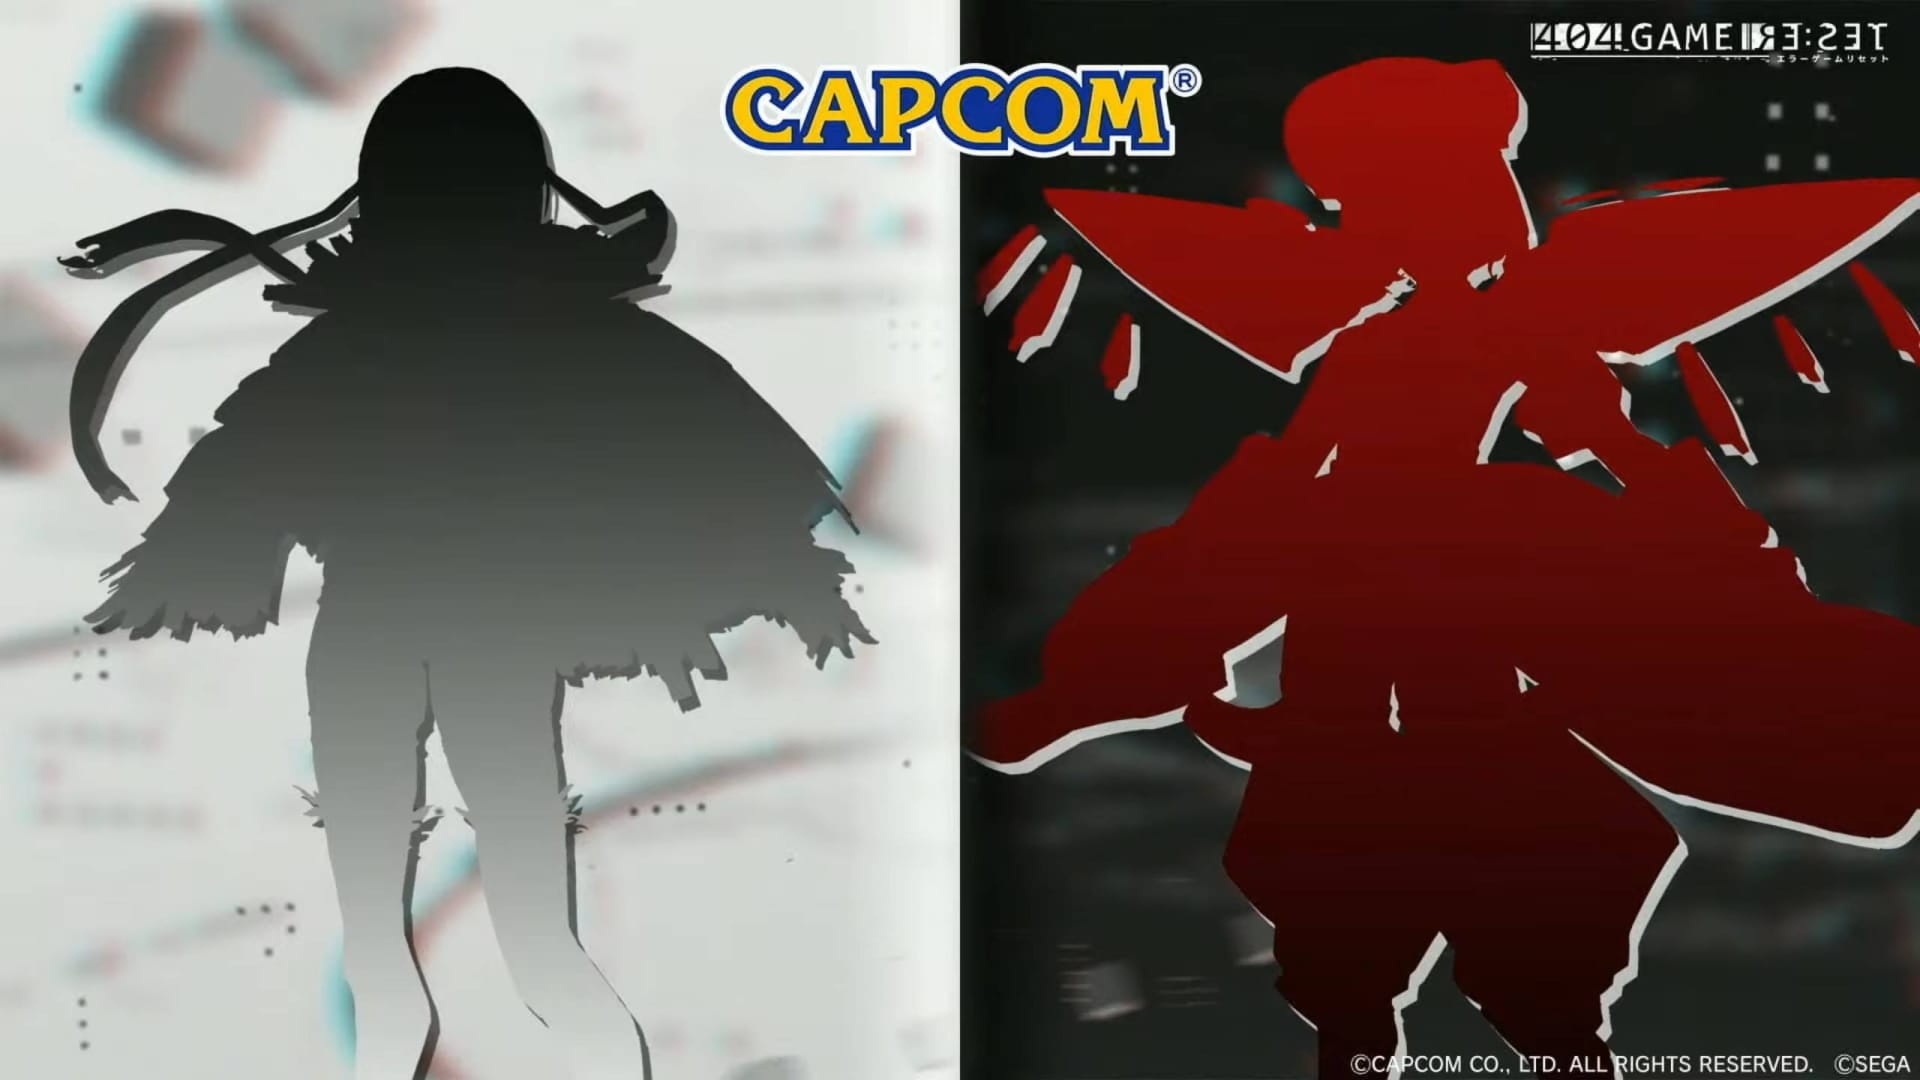 404 Game Re:Set - A mysterious character from Capcom